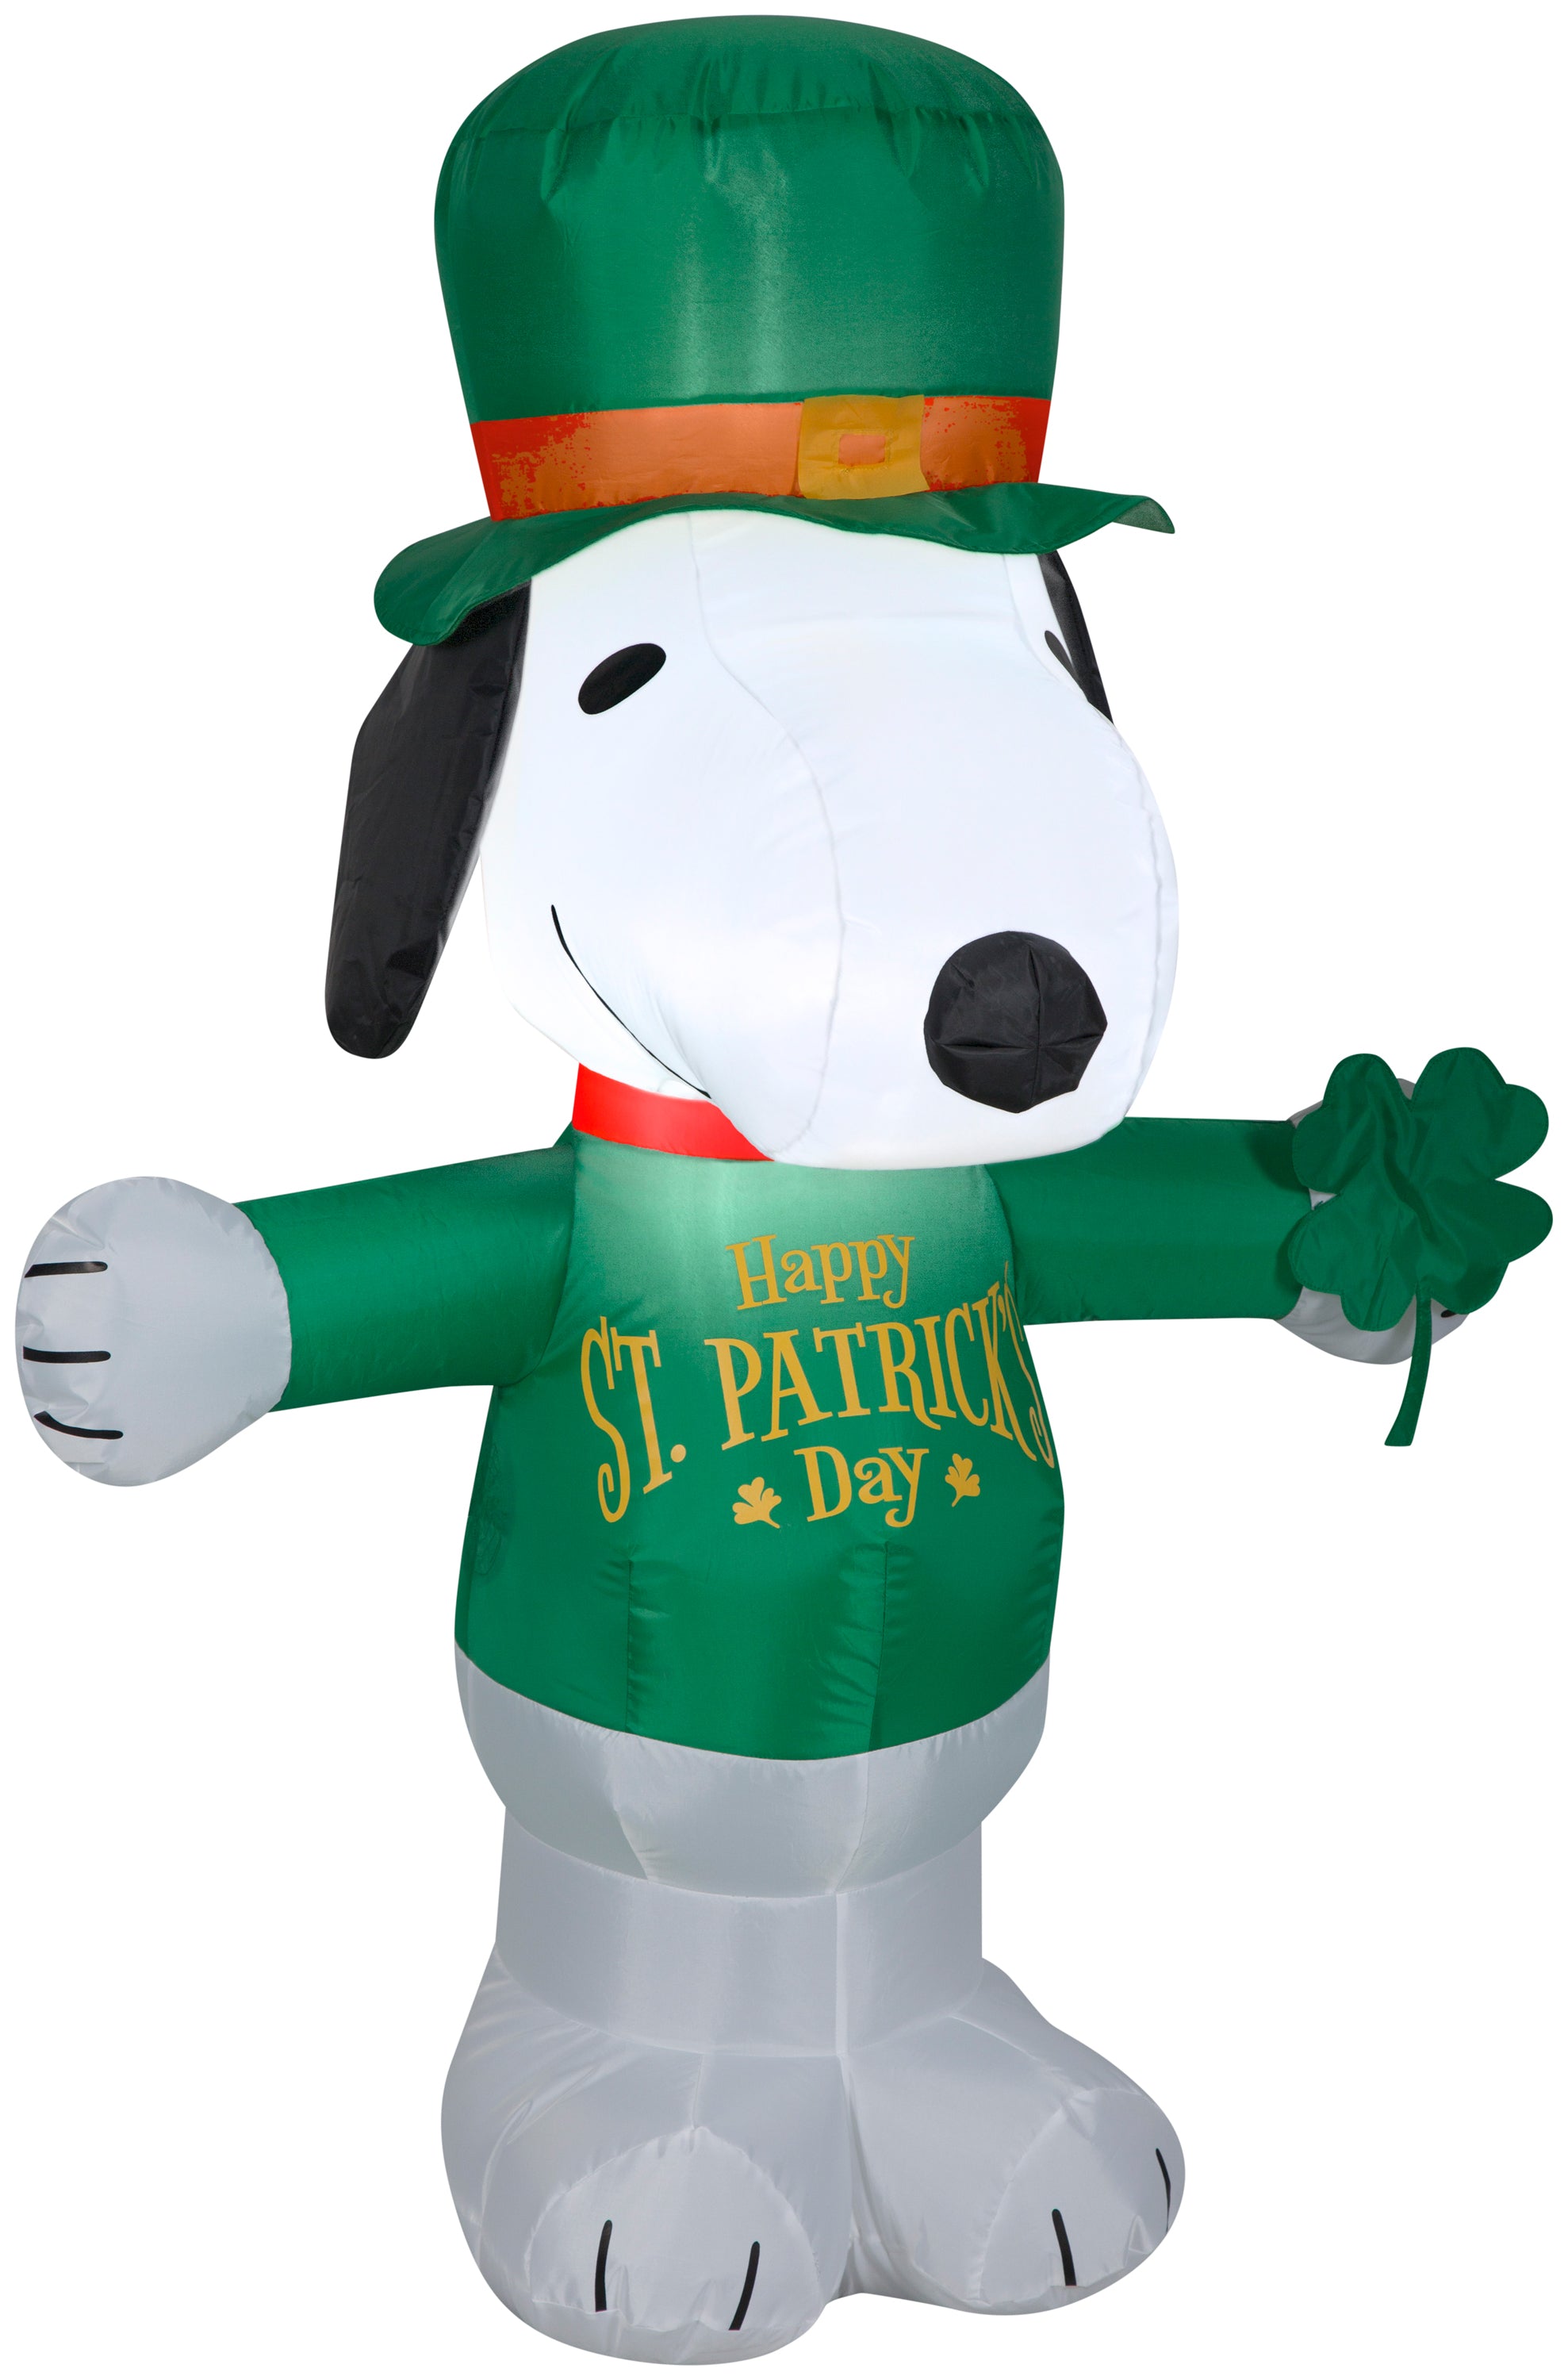 Gemmy Airblown Inflatable St. Patrick's Day Snoopy, 3.5 ft Tall